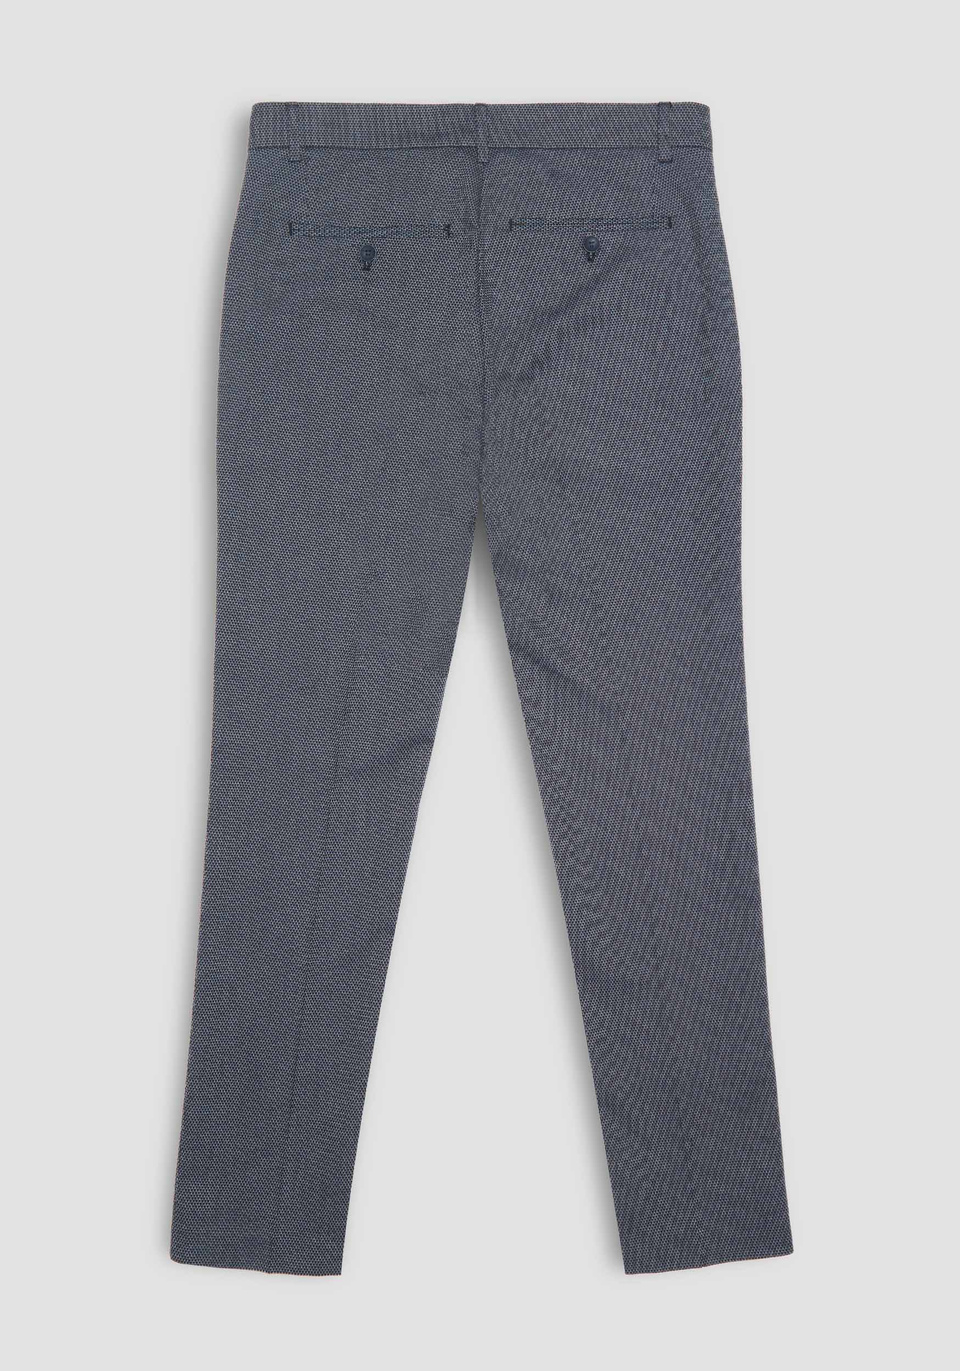 “BRYAN” SKINNY FIT TROUSERS WITH MICRO-PATTERN - Antony Morato Online Shop